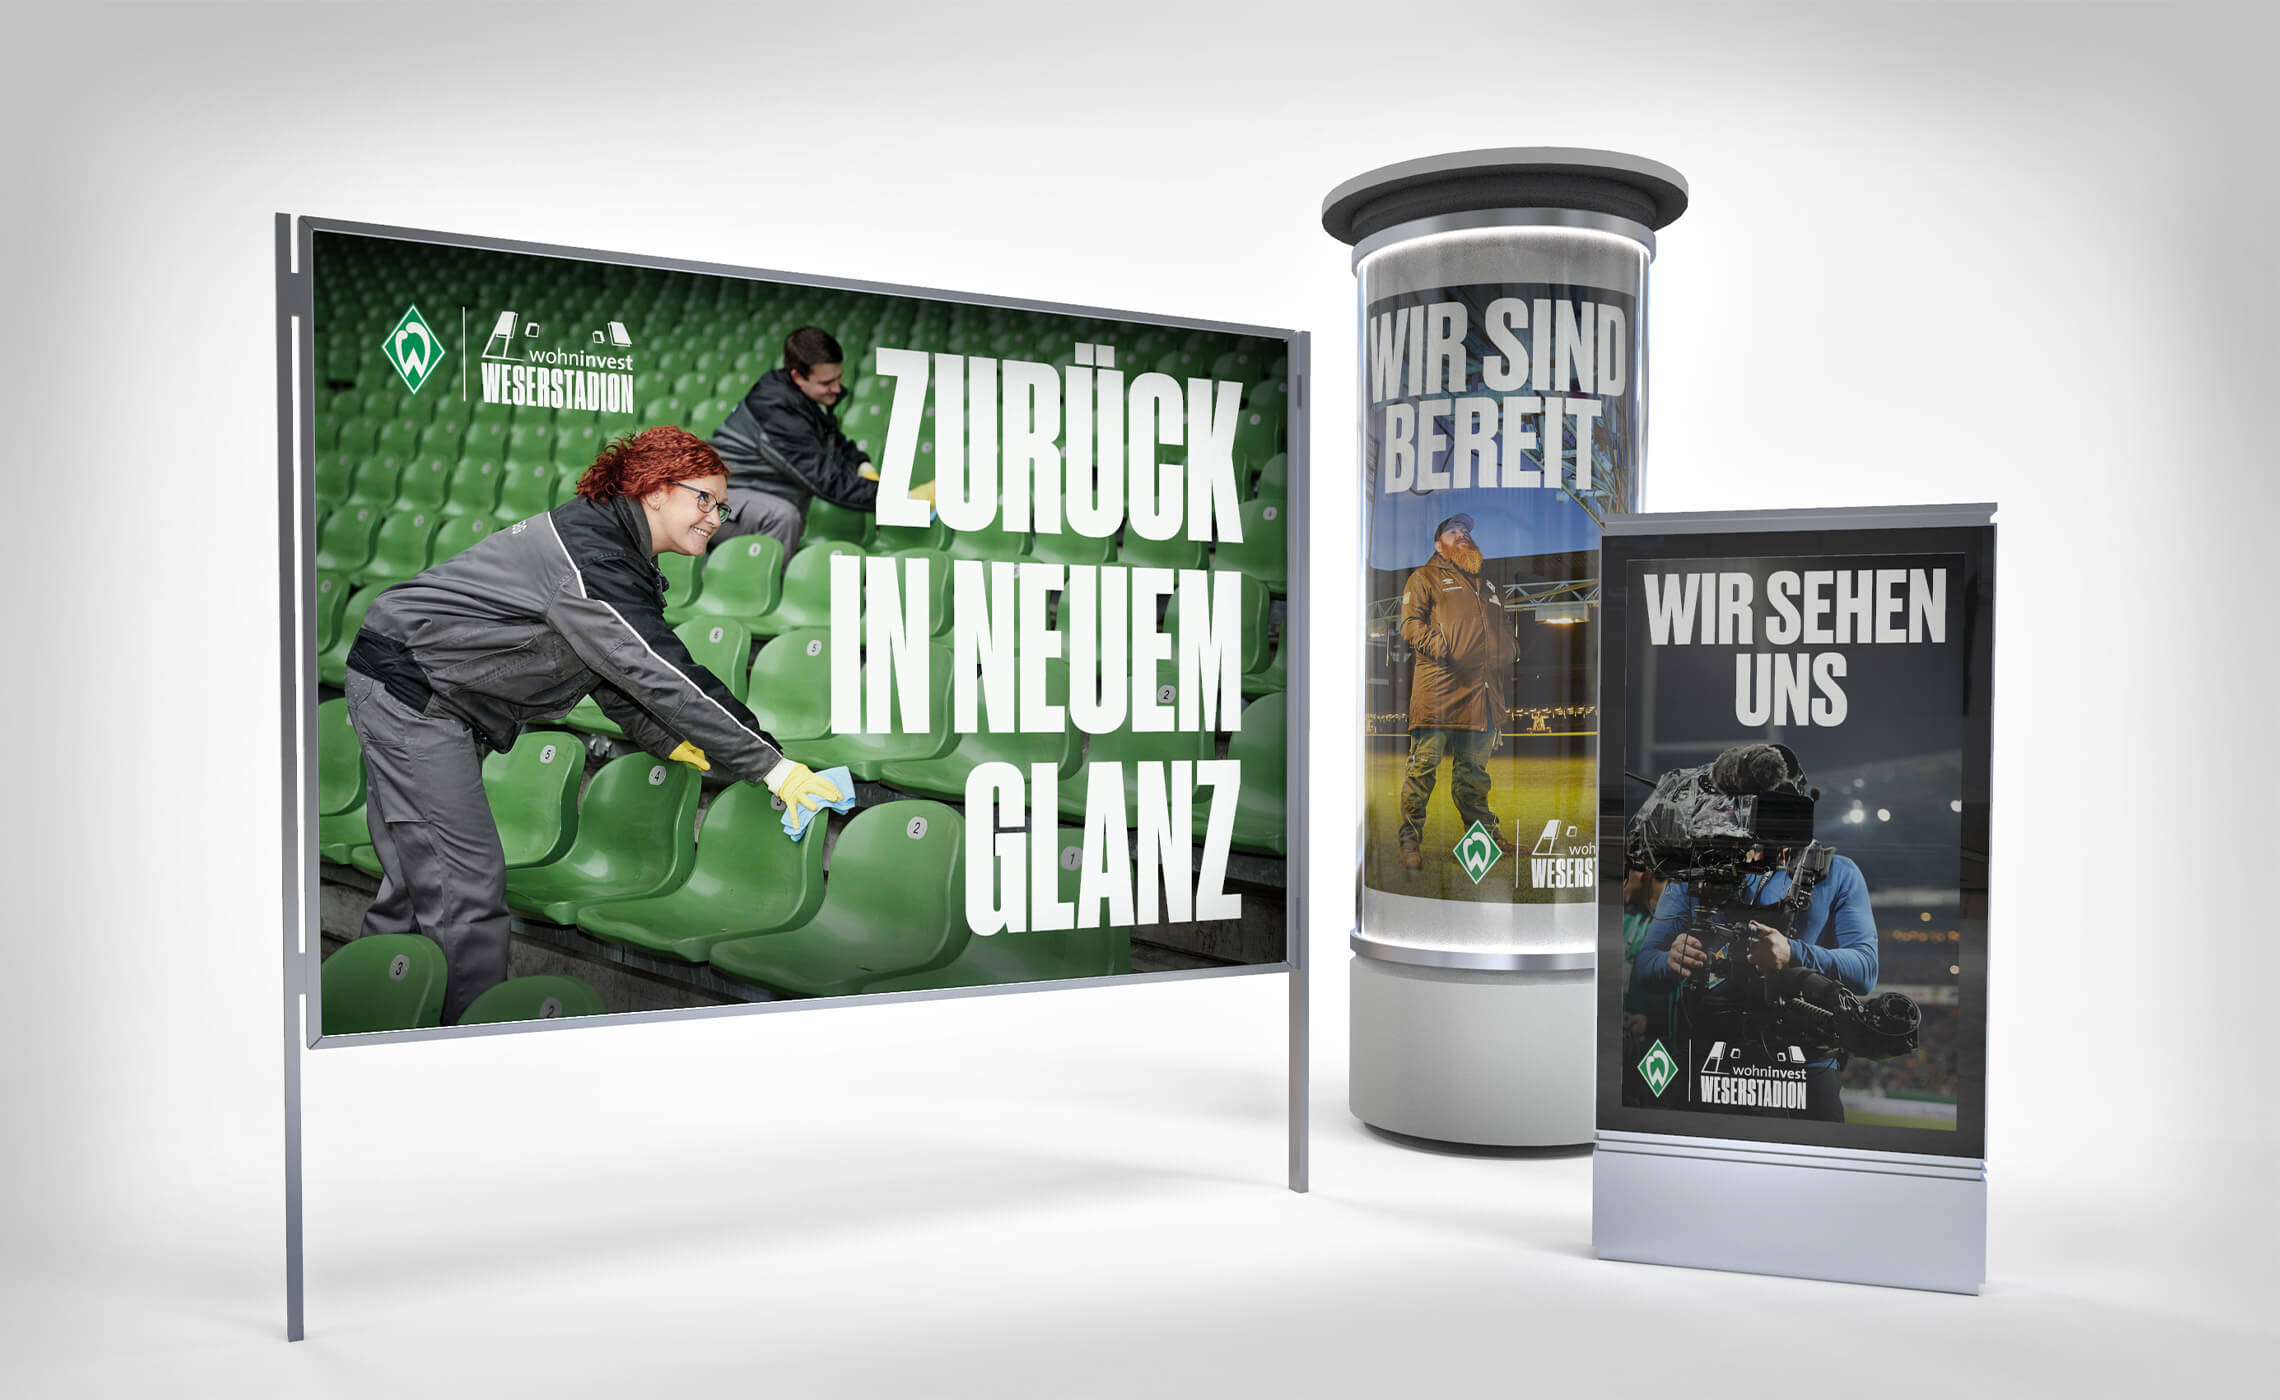 This picture shows a marketing campaign with Werder Bremen for the second round start of the Bundesliga.